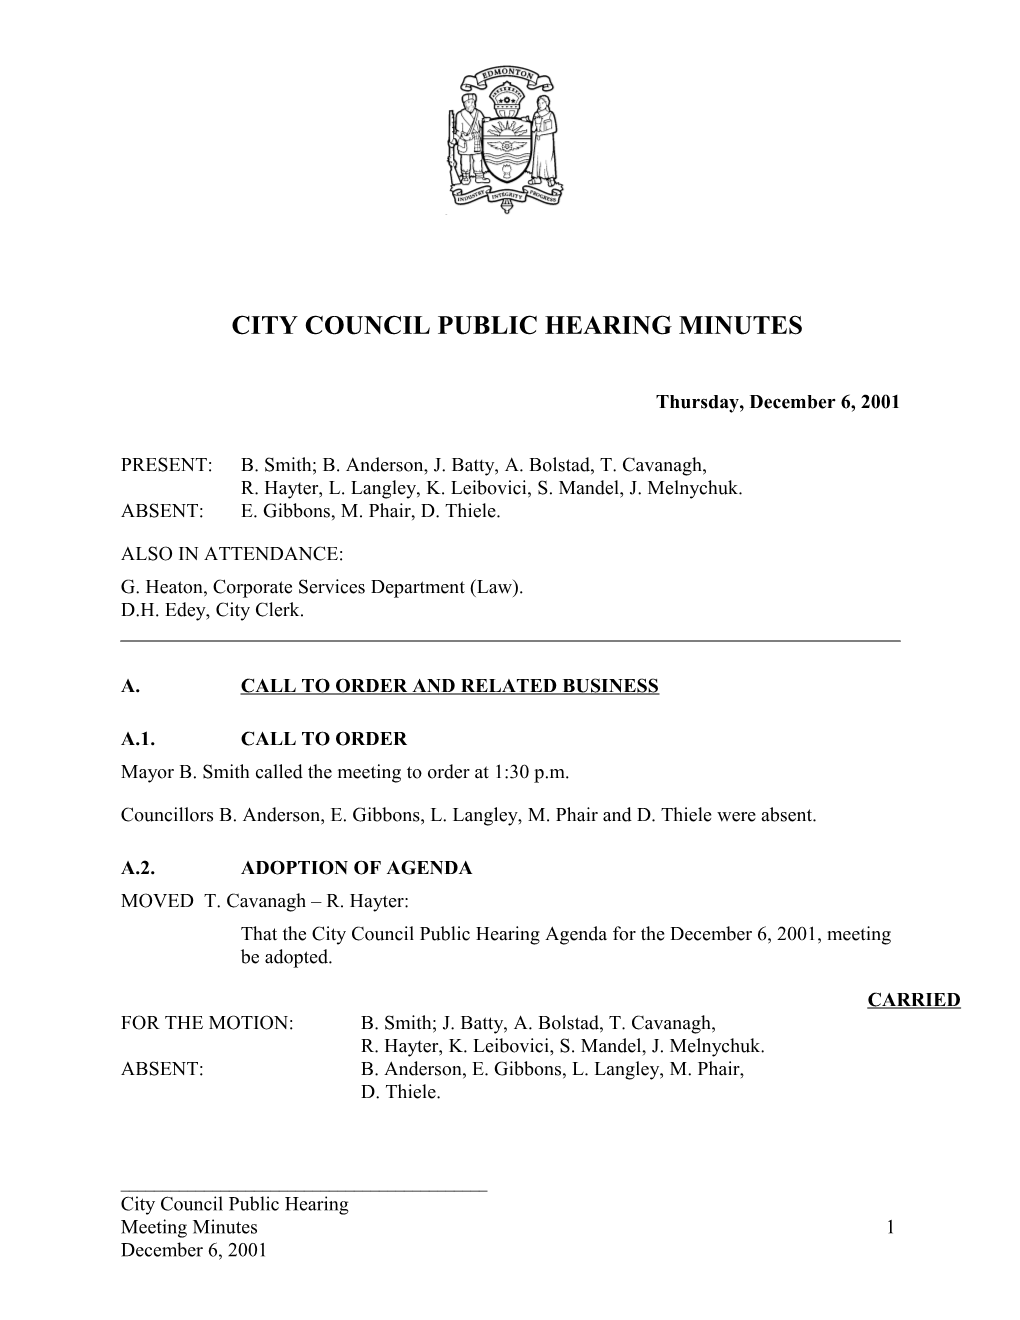 Minutes for City Council December 6, 2001 Meeting